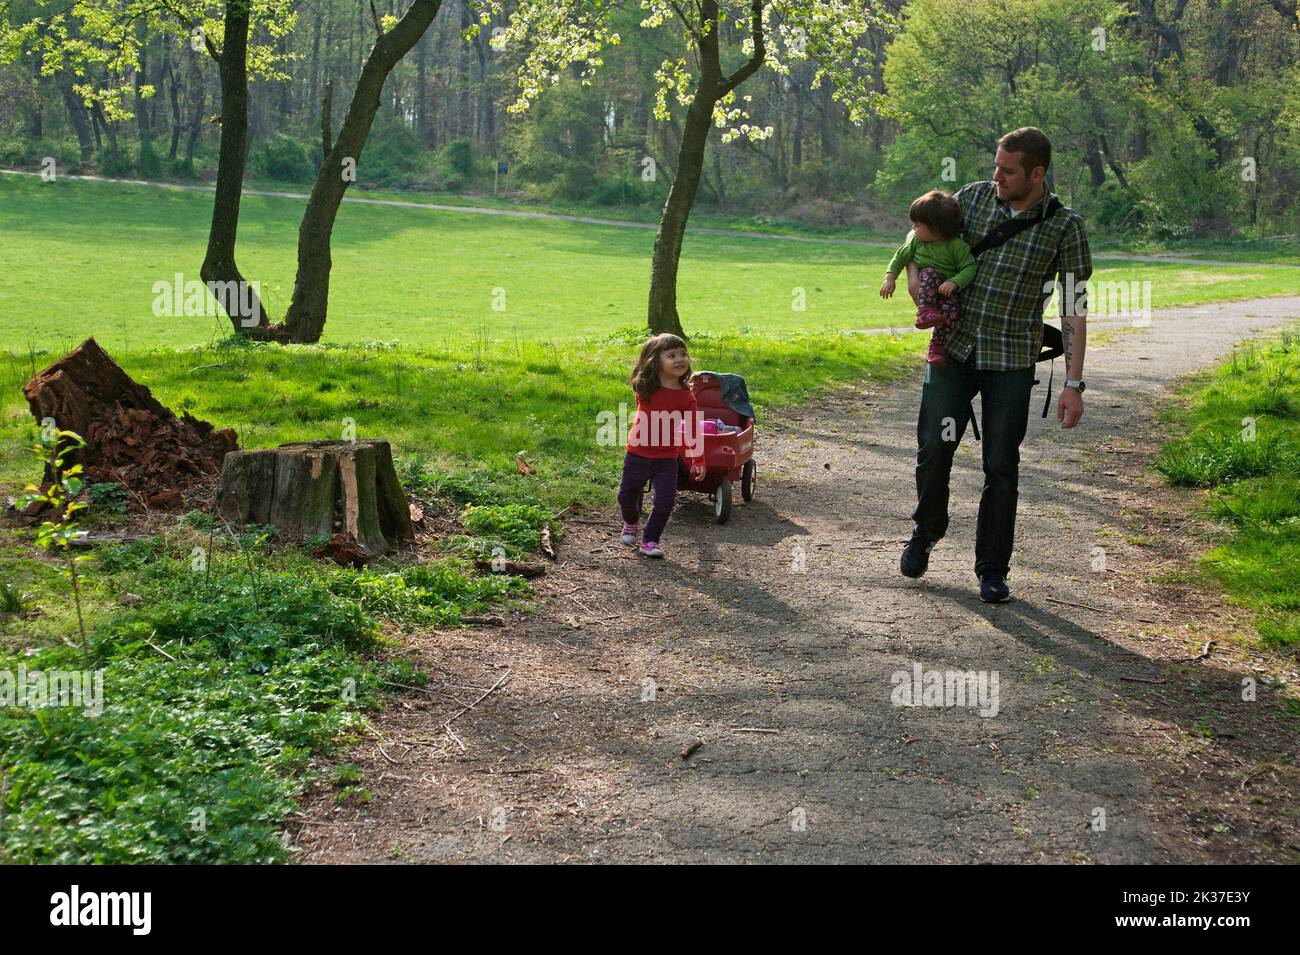 FATHER AND DAUGHTERS ON A WALK IN NYC PARK Stock Photo